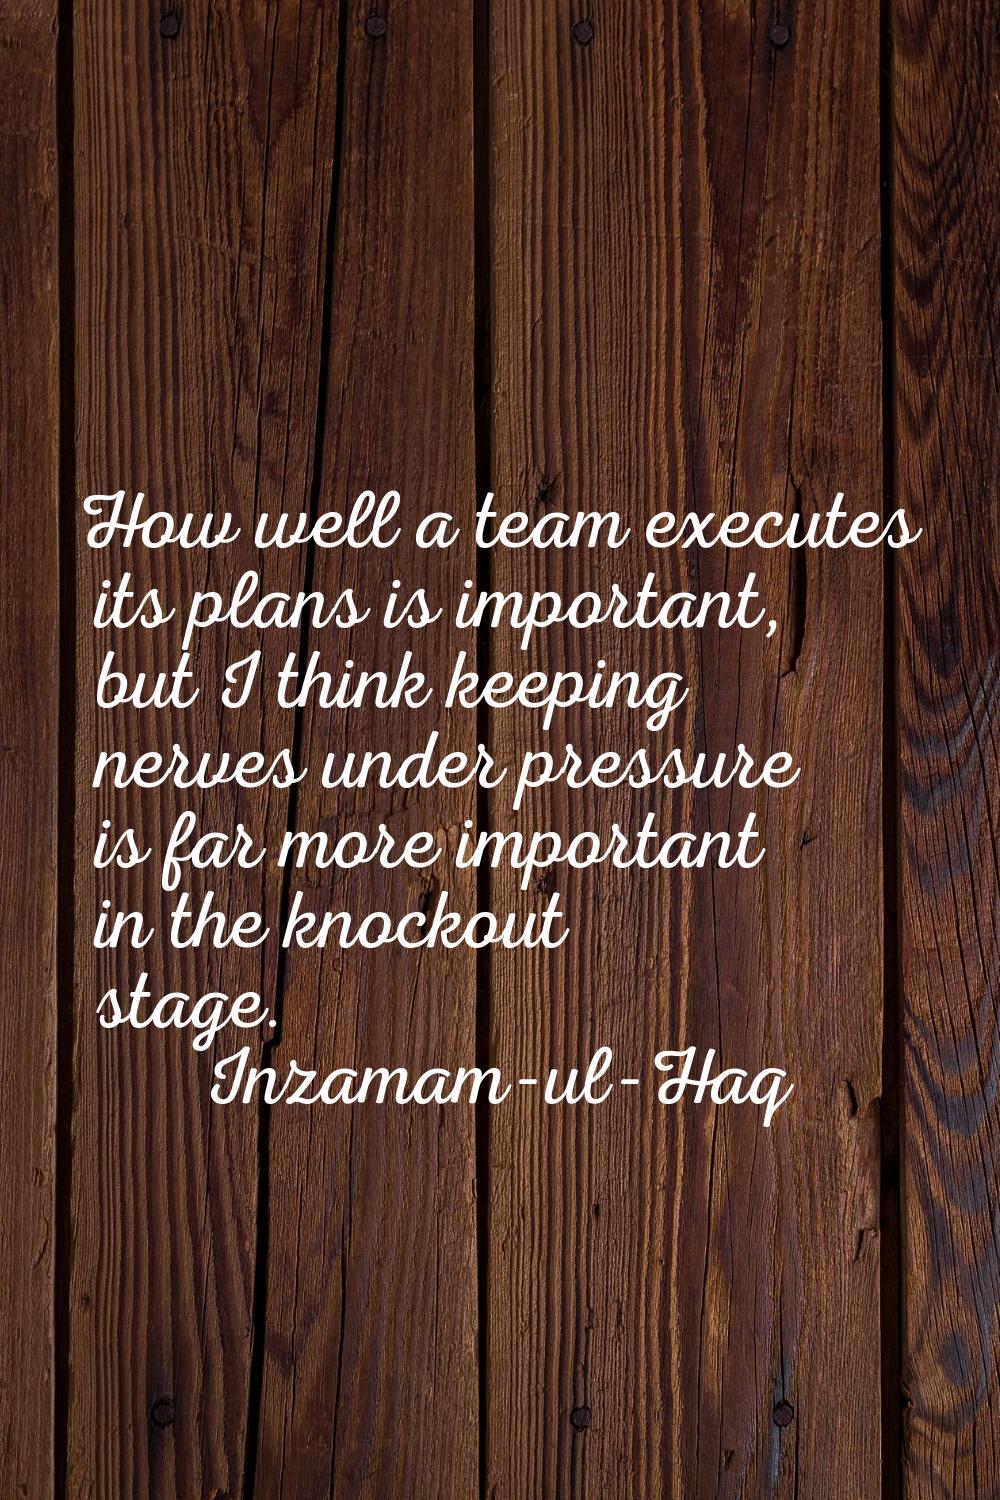 How well a team executes its plans is important, but I think keeping nerves under pressure is far m